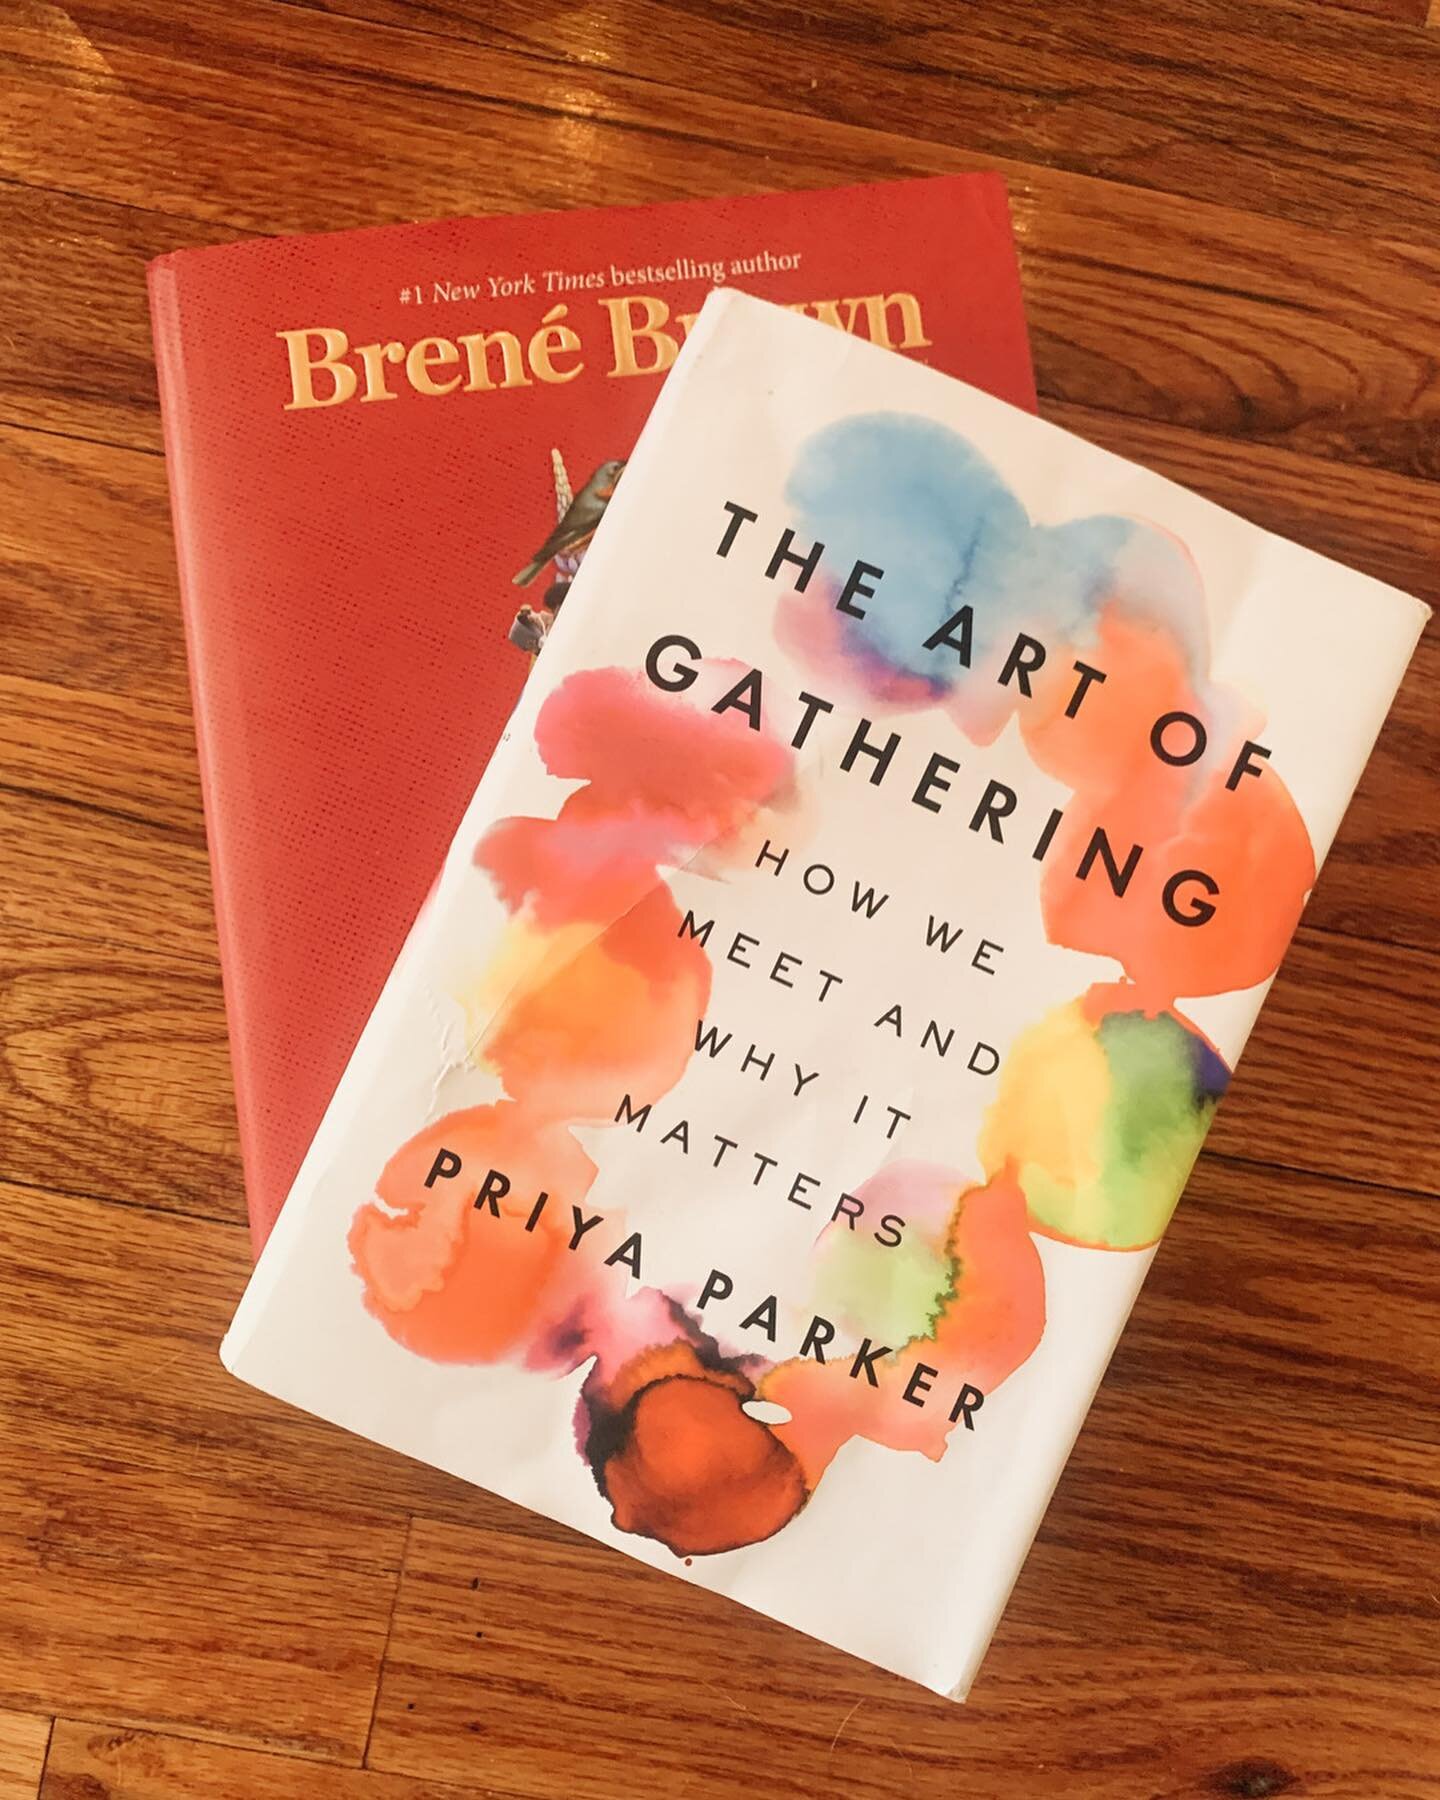 I feel late to the game and yet, right on time with finishing up &lsquo;The Art of Gathering: How We Meet and Why It Matters&rsquo; by Priya Parker last week. I know this book was published back in May of 2018 but as books do, they show up when you n